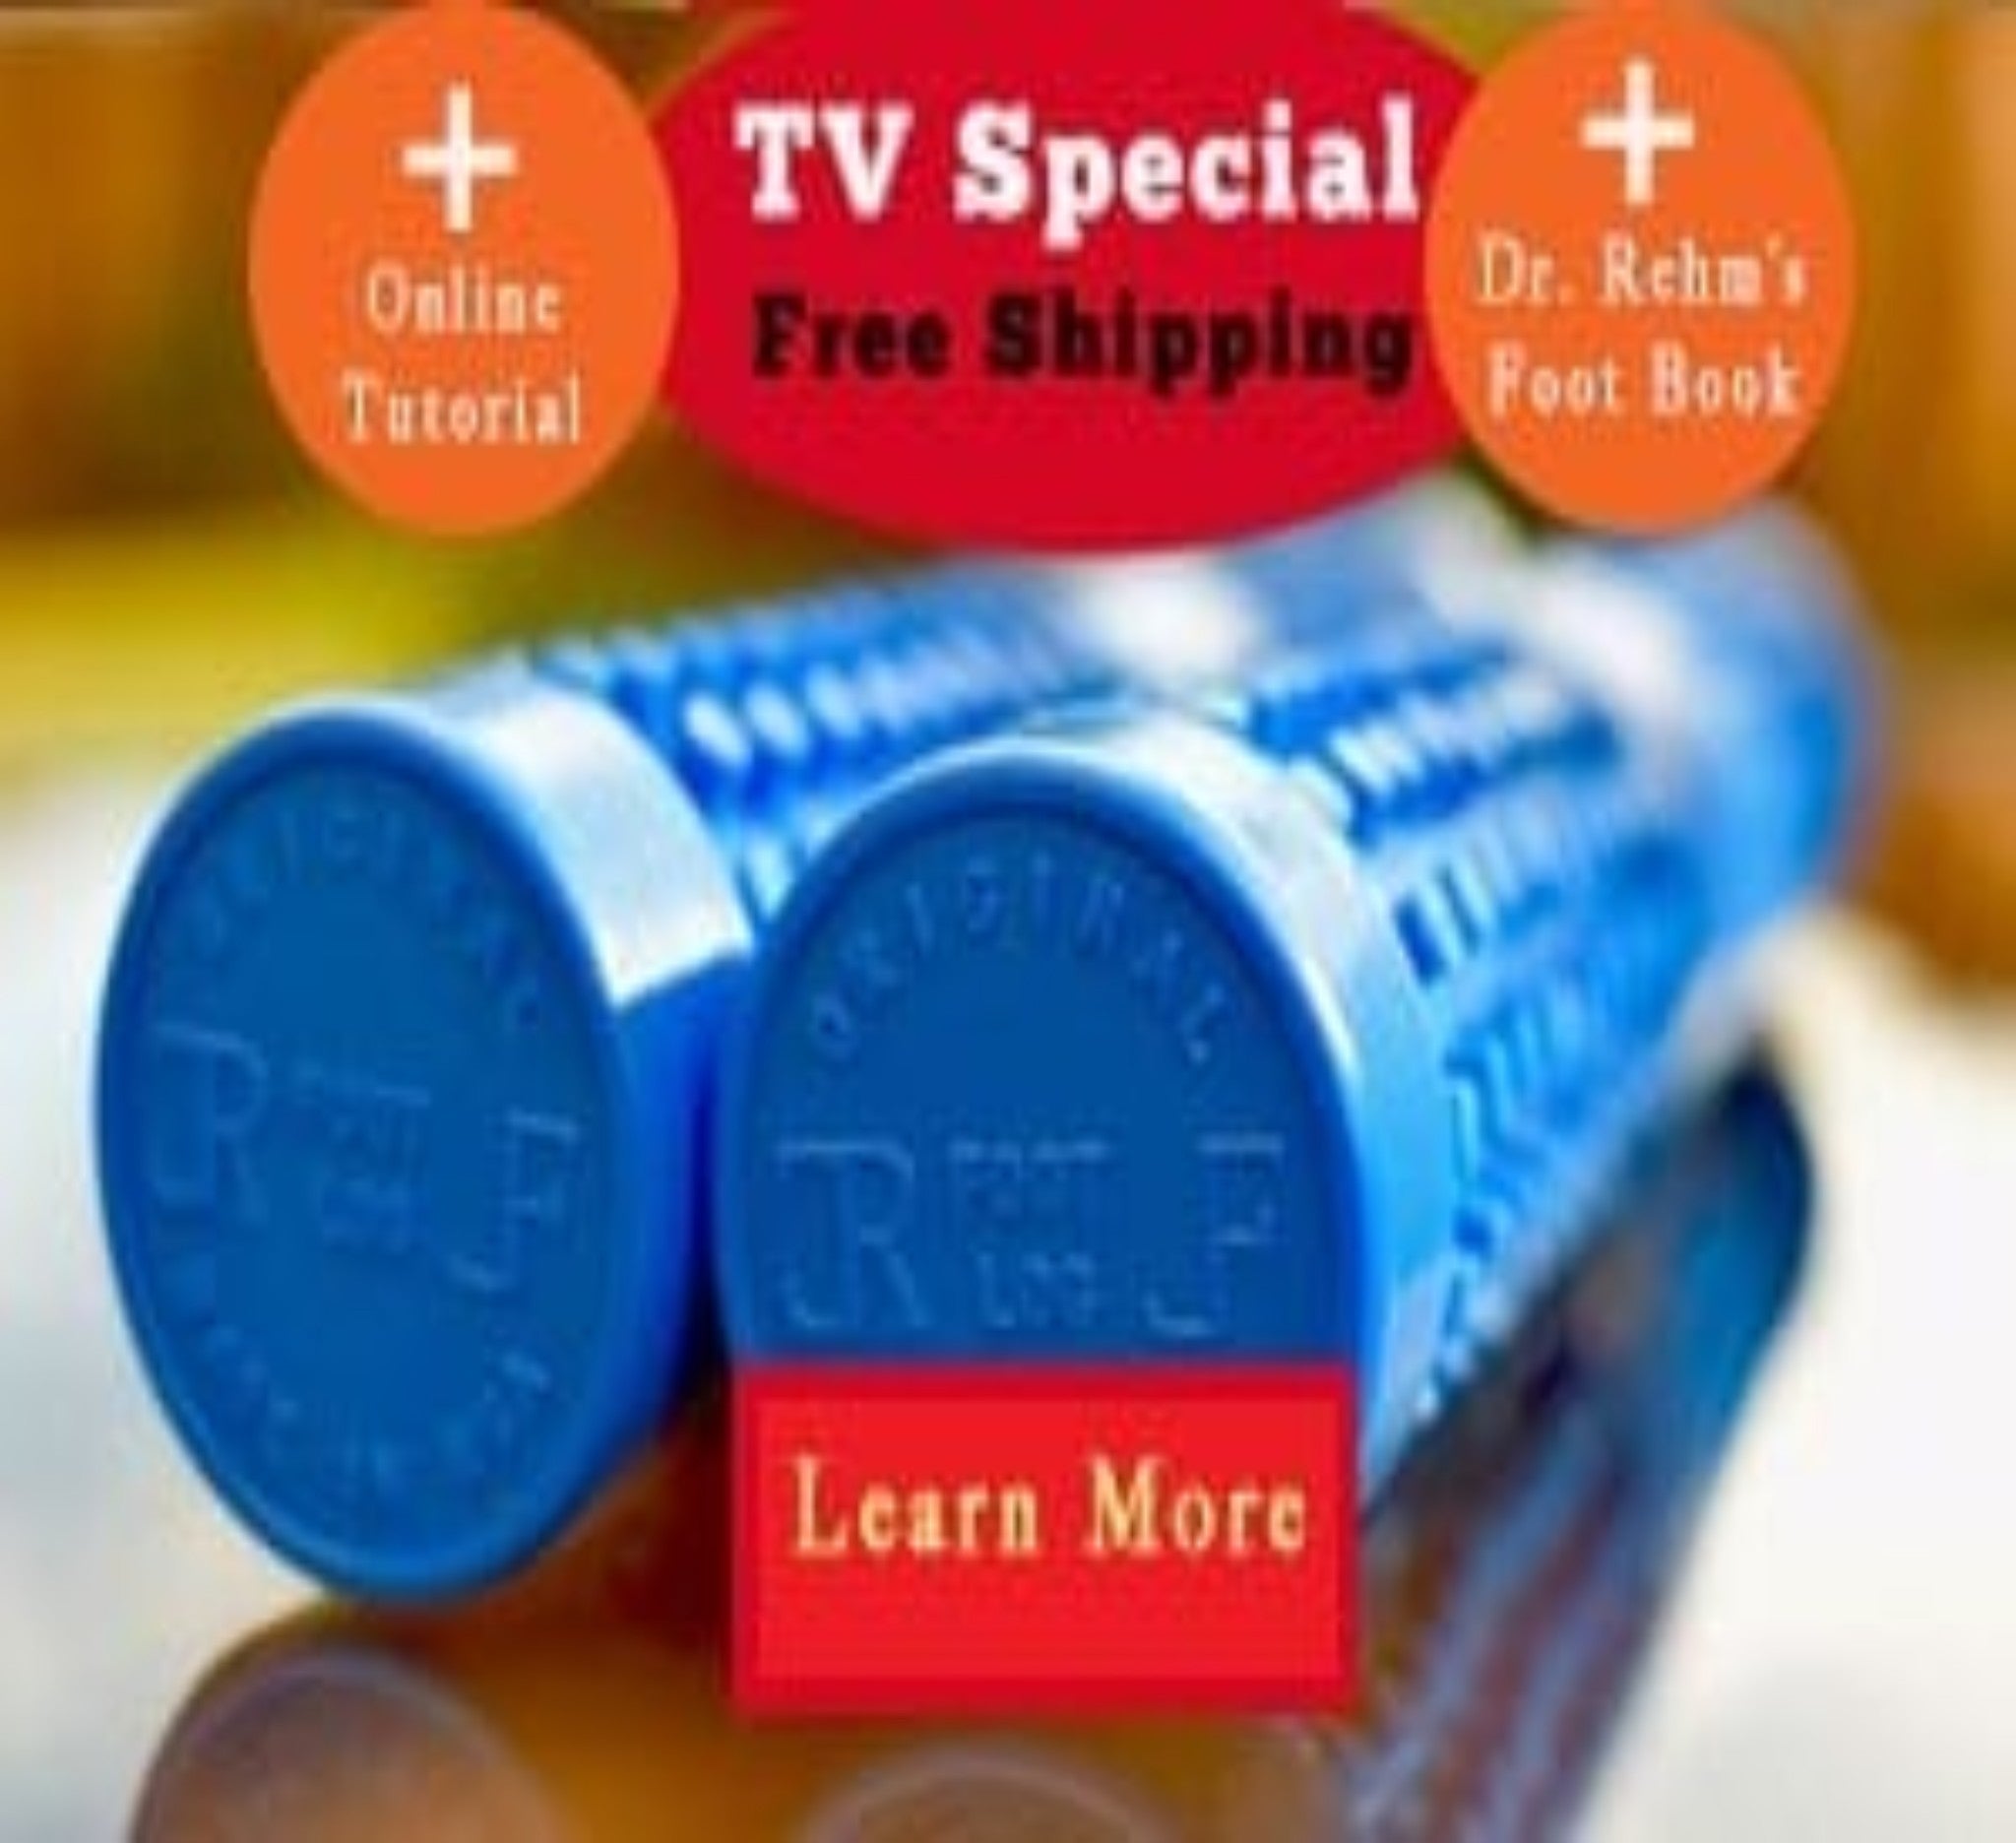 2 FootLogs (Blue) – Tv Special + Free Shipping